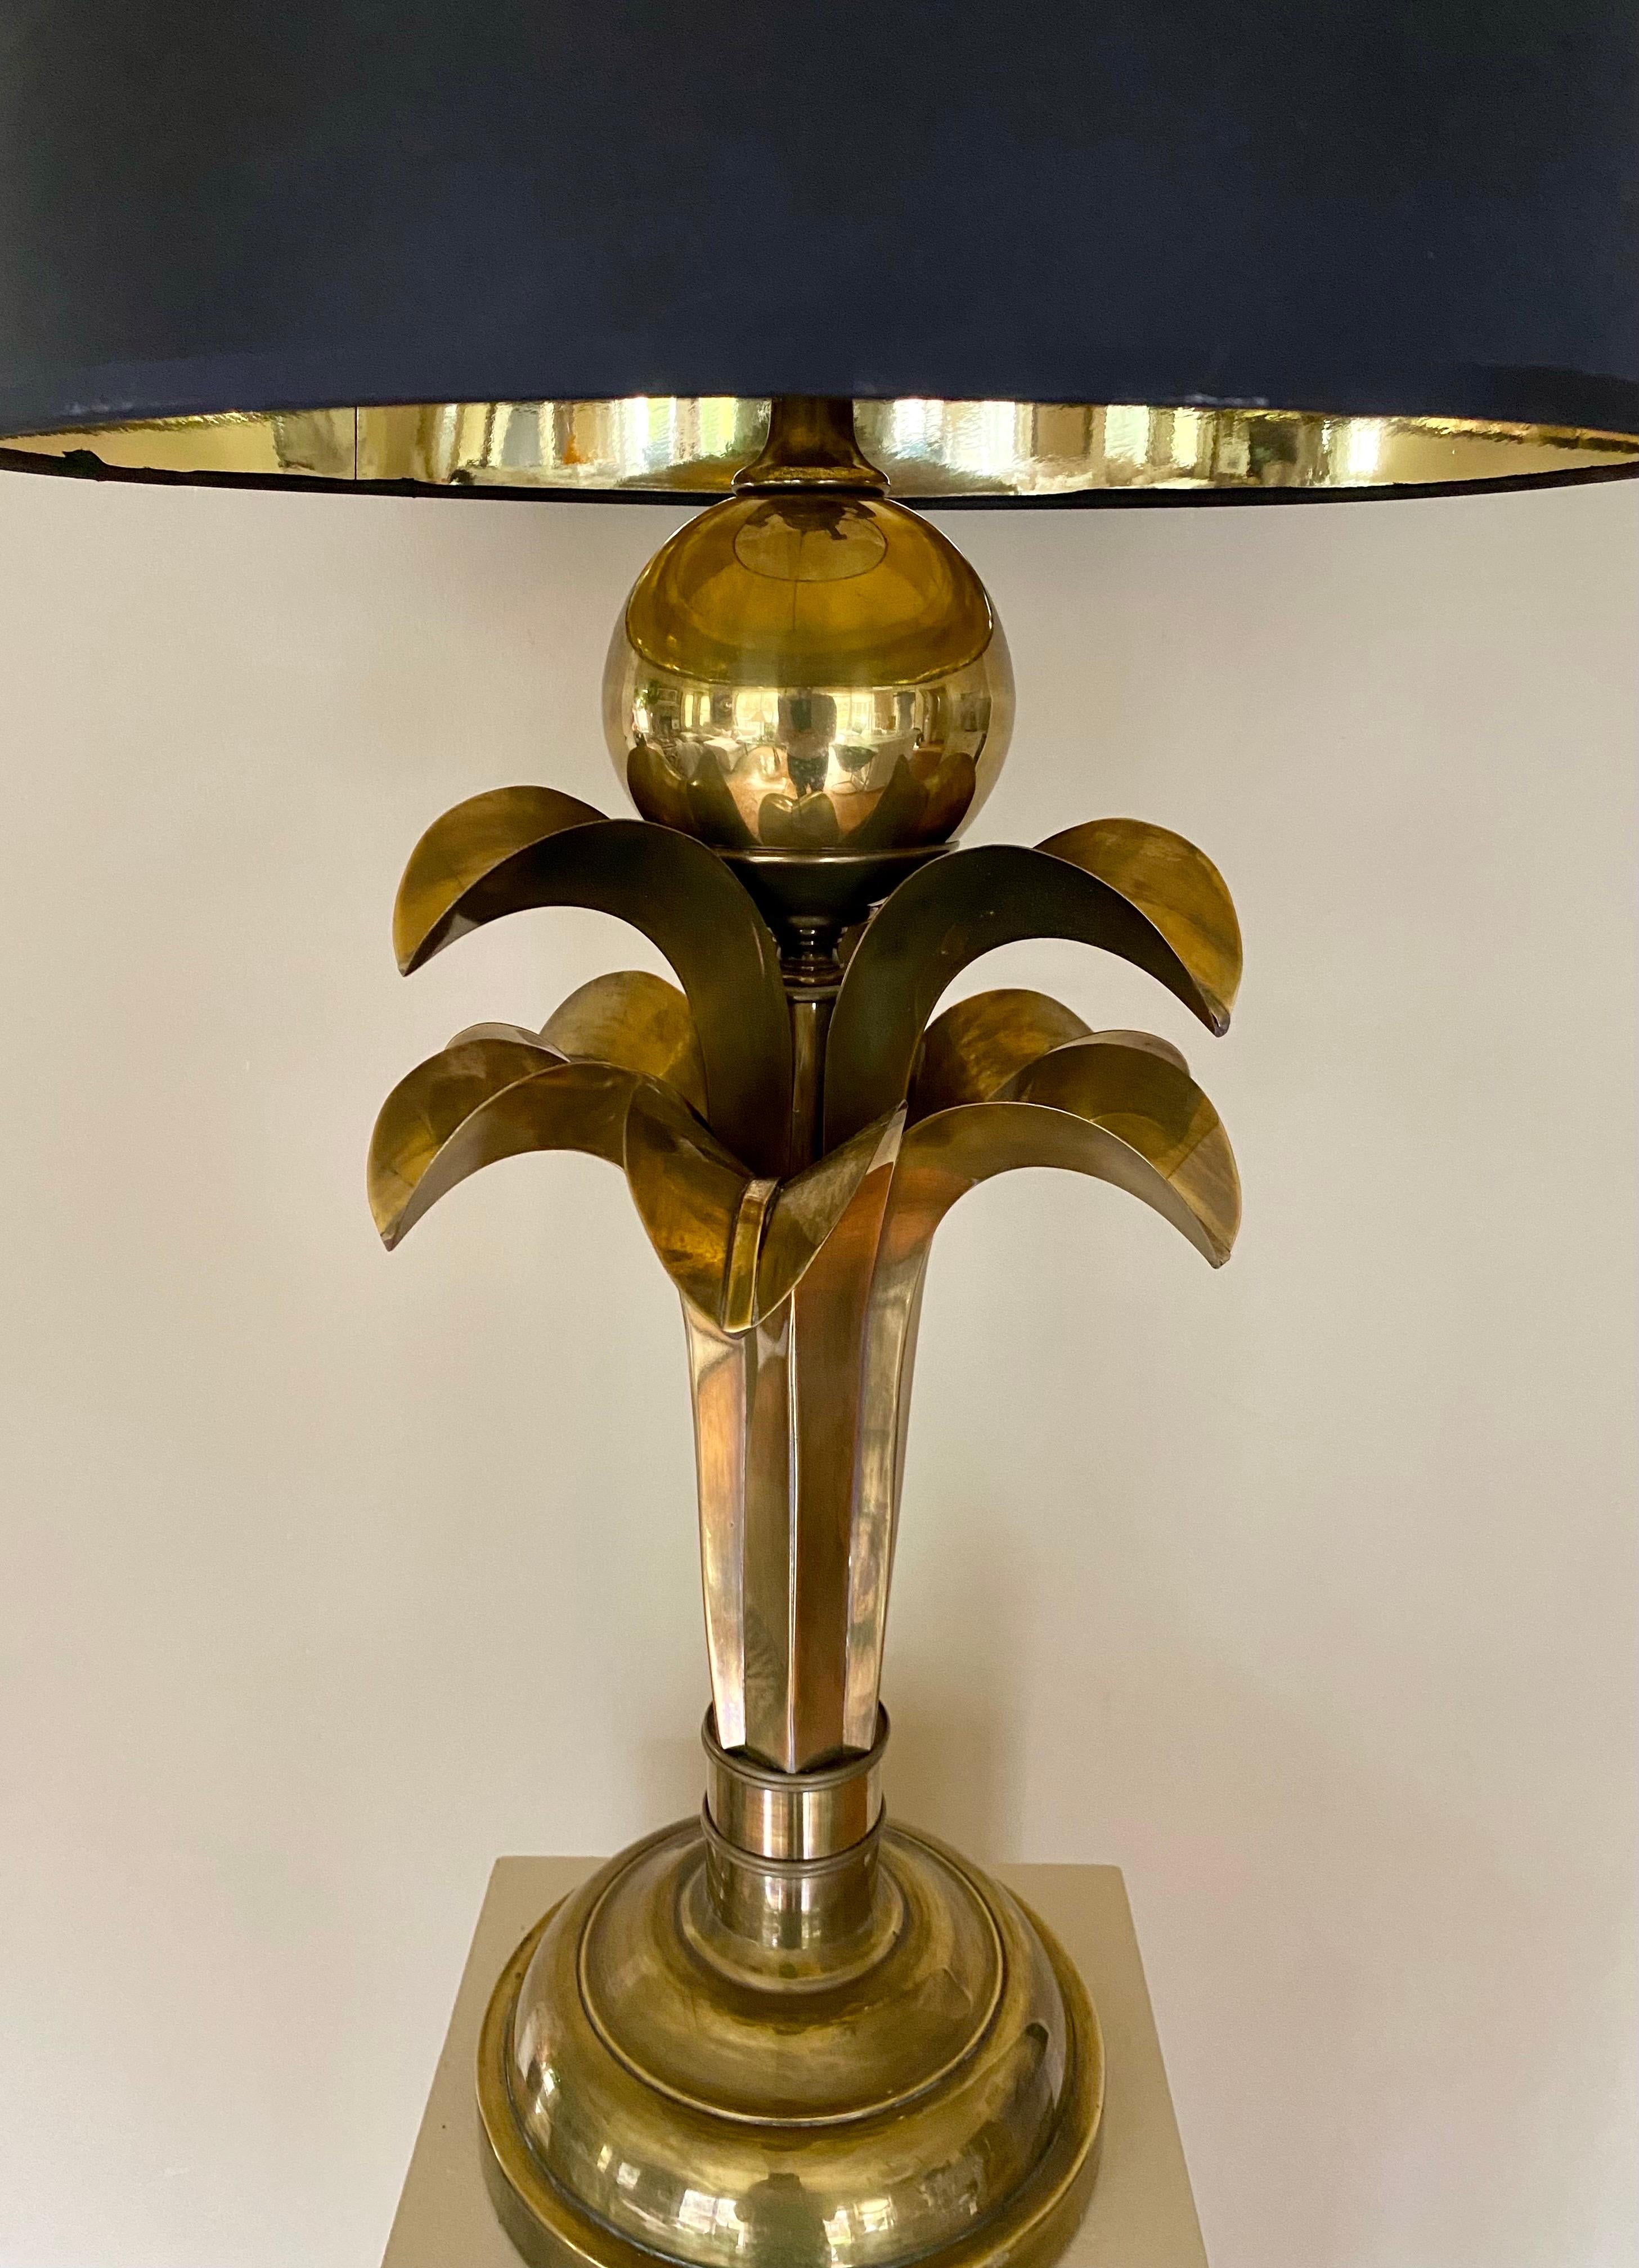 Fabulous Art Deco style palm tree form table lamp by Hart Associates, circa 1970's.  This warm aged patinated brass metal lamp features a stylized bamboo stem, sculptural palm leaves, and a large reflective center sphere.  Lamp shade no included. 